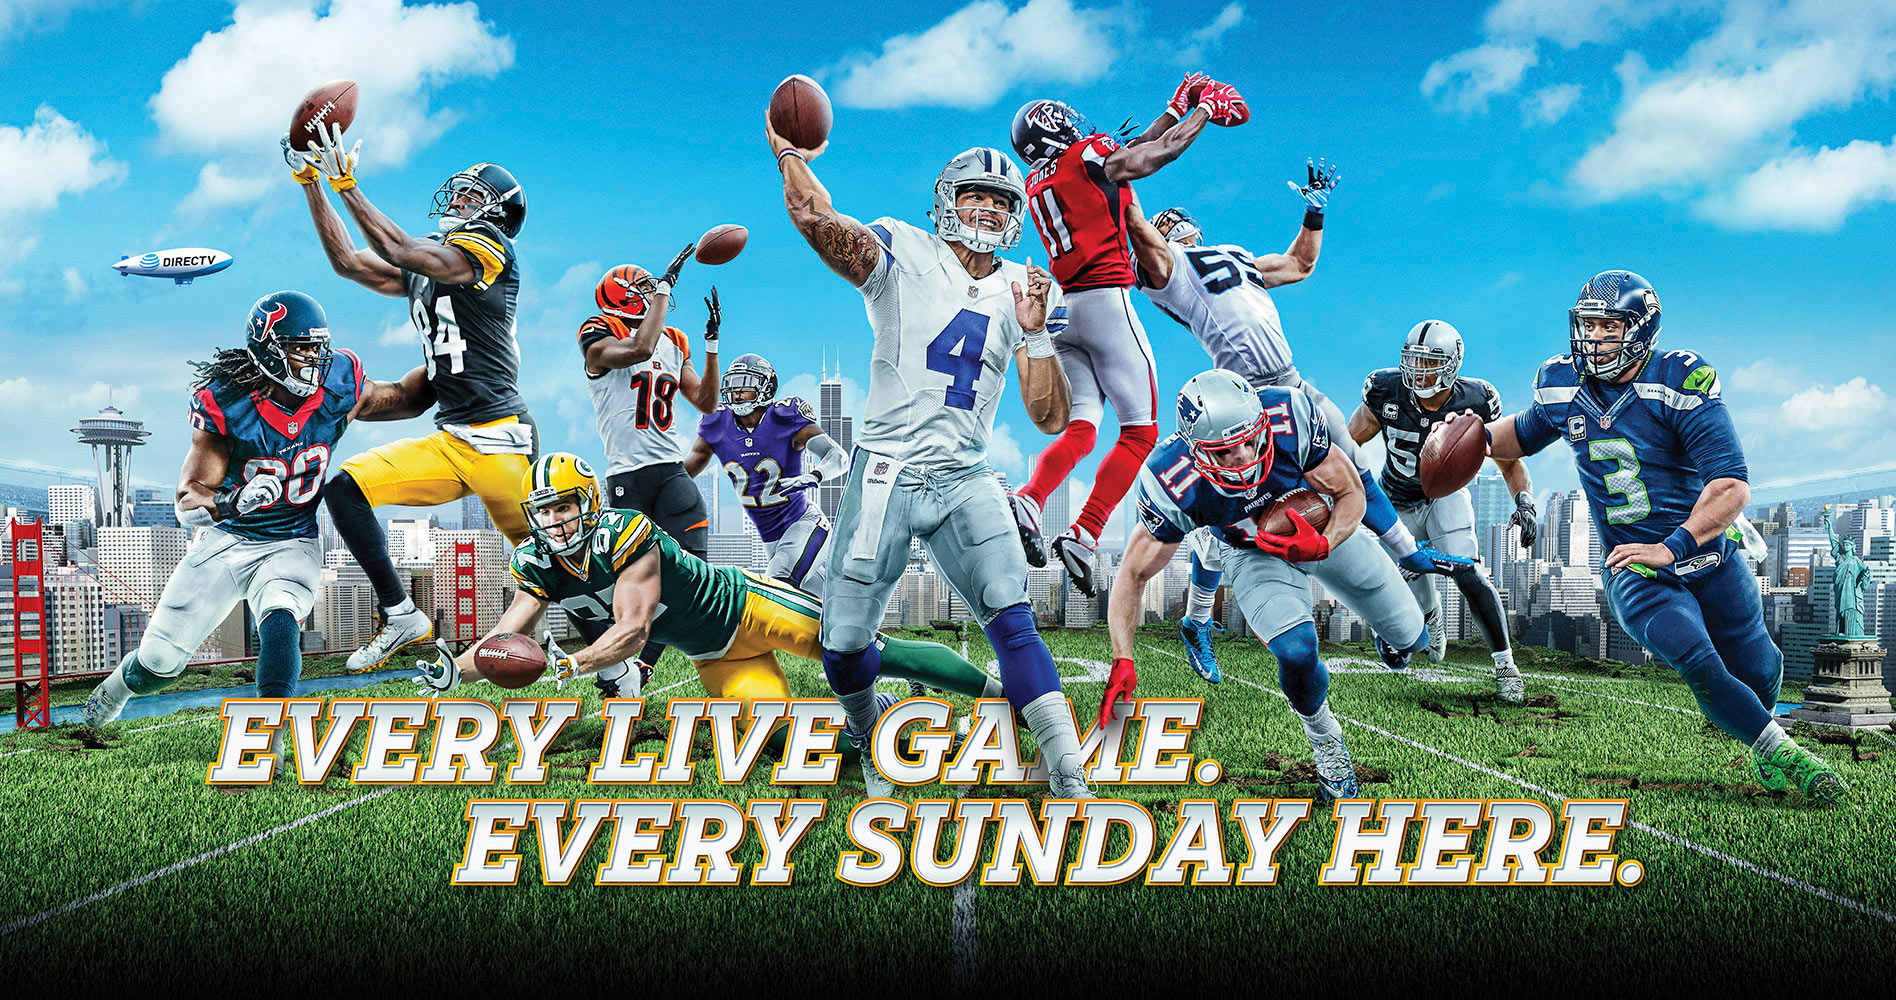 4. Military Discounts for NFL Sunday Ticket - wide 6